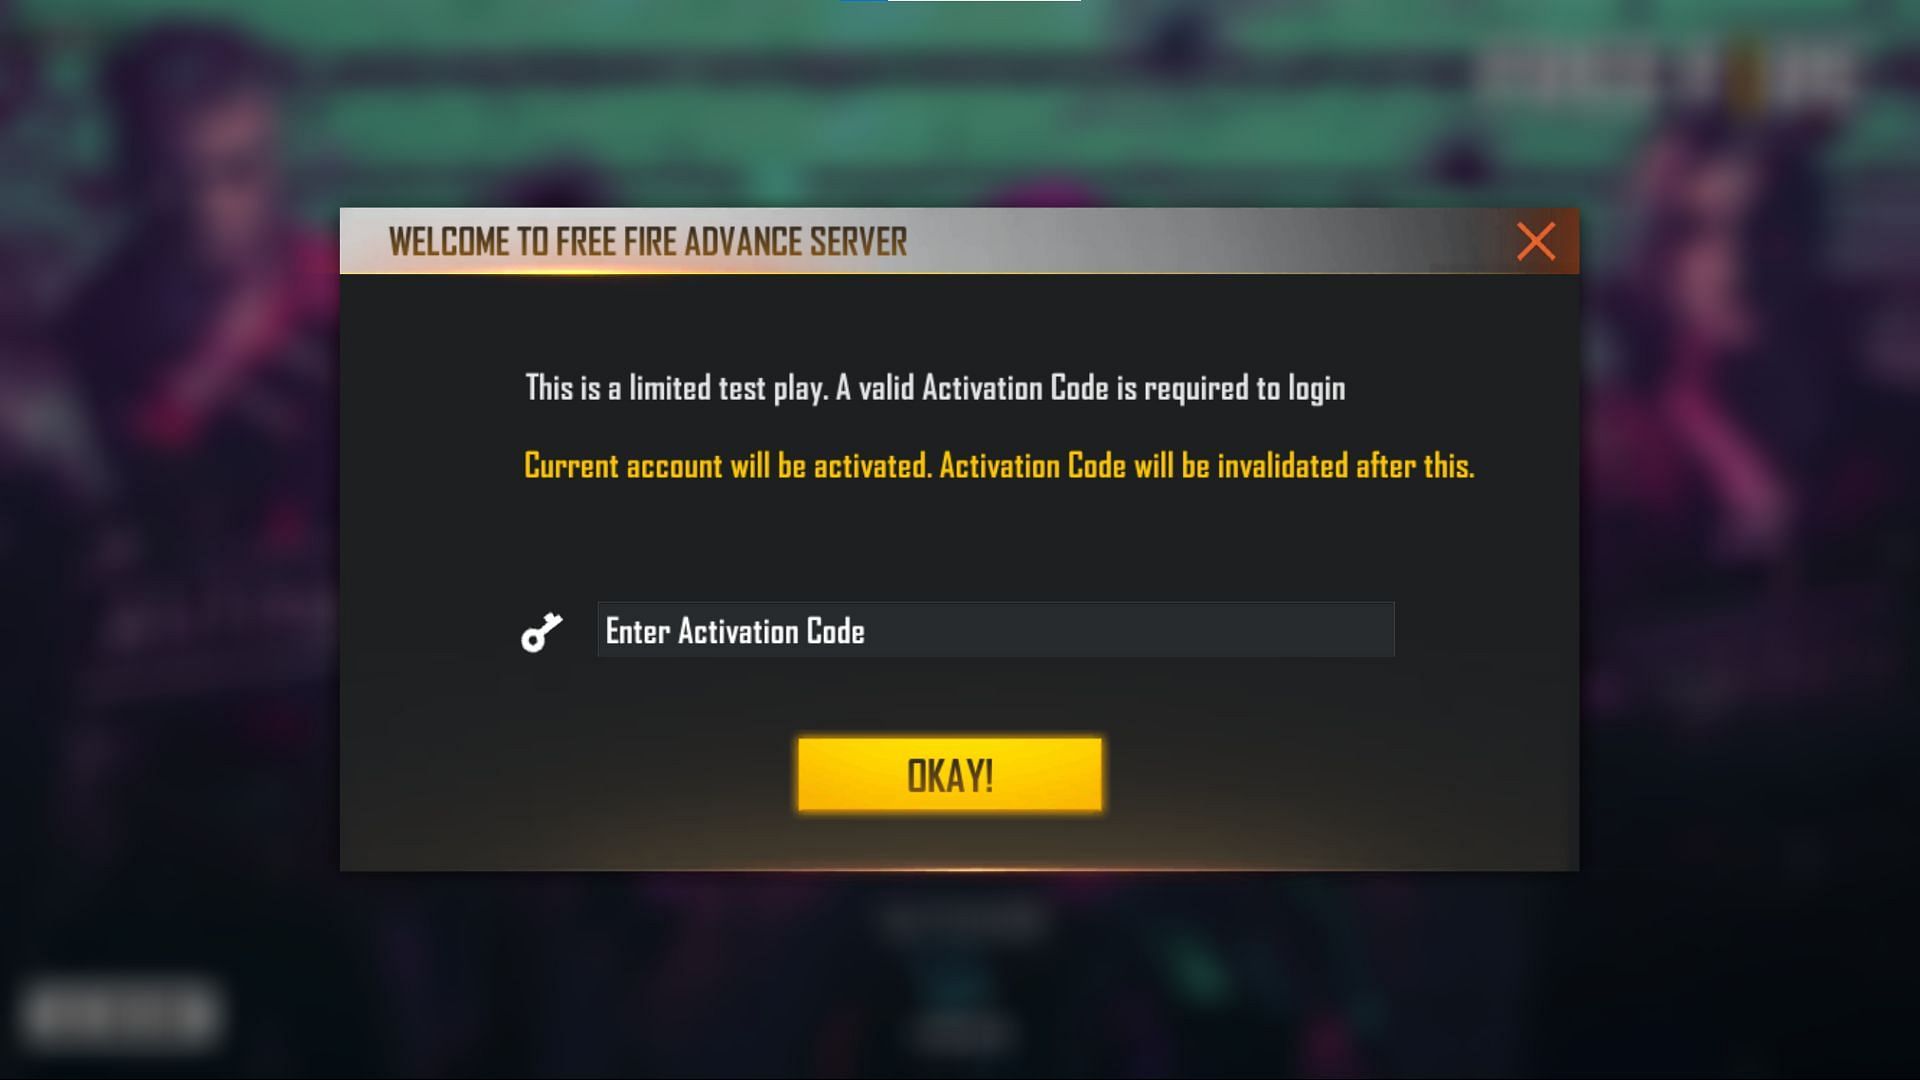 Enter the Activation Code after opening Advance Server (Image via Free Fire)